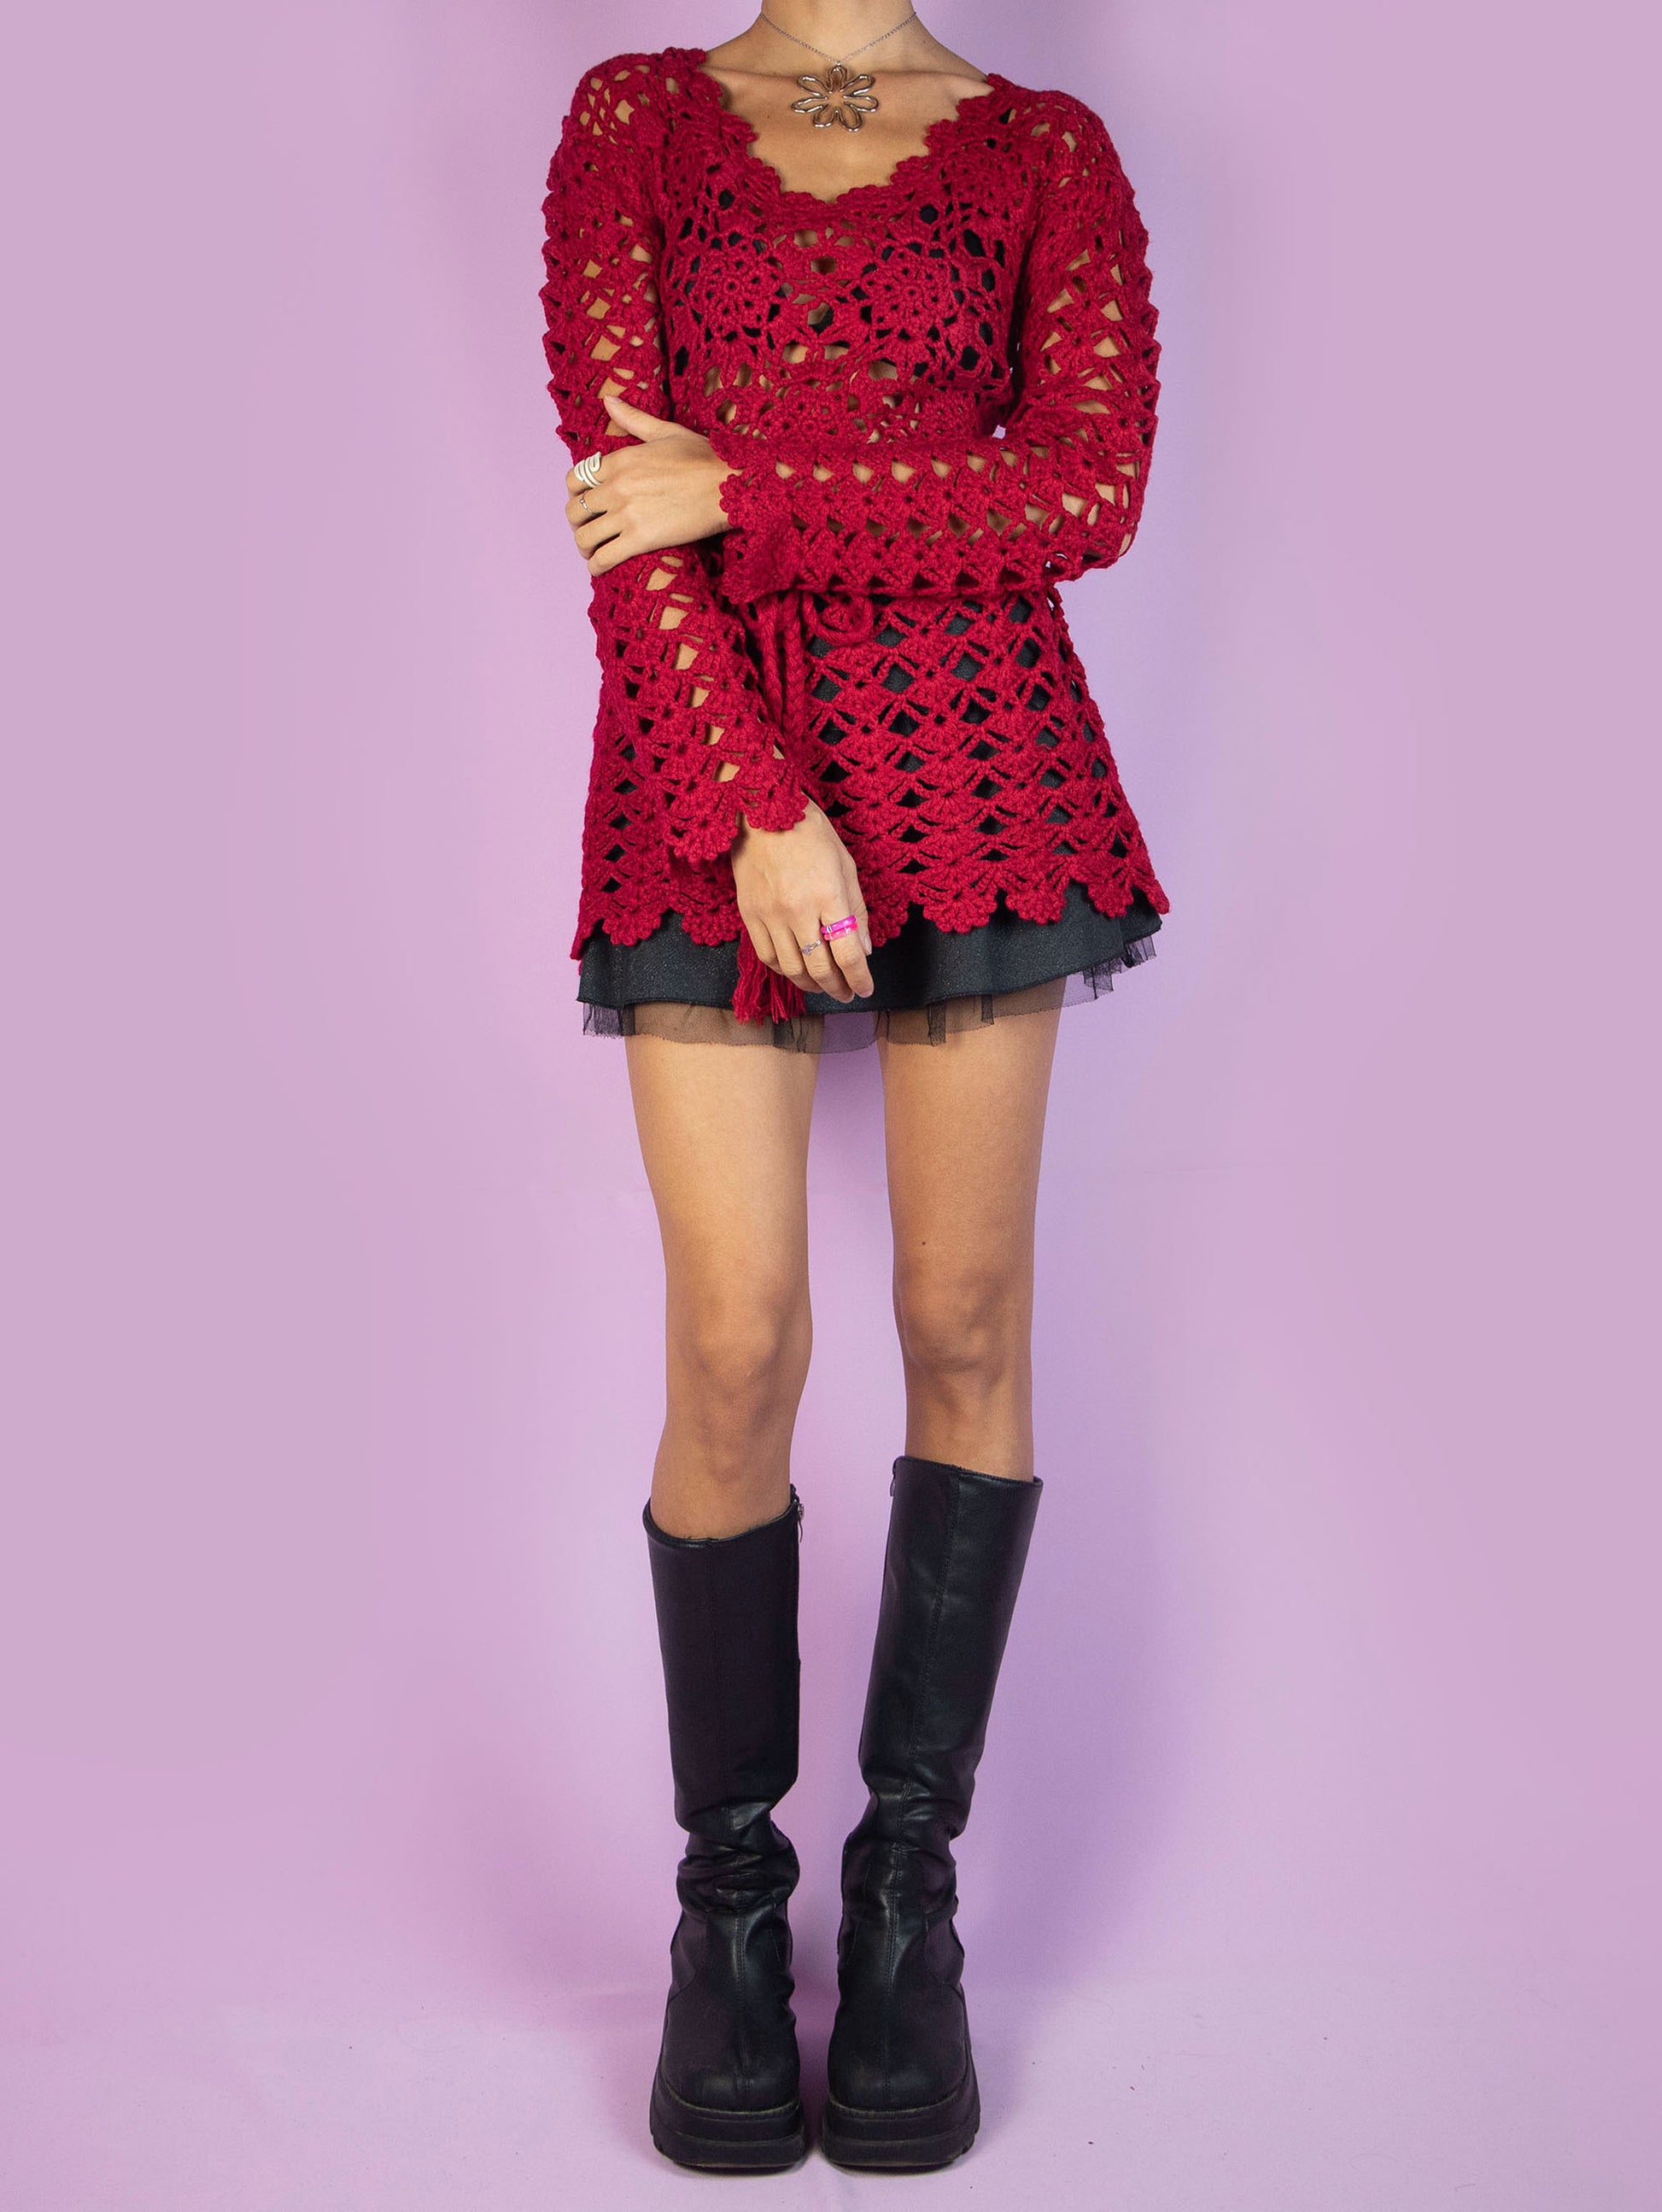 The Y2K Red Crochet Knit Sweater is a red crocheted knit top that ties at the waist and is made from a wool blend. Stunning romantic coquette boho 2000s pullover.